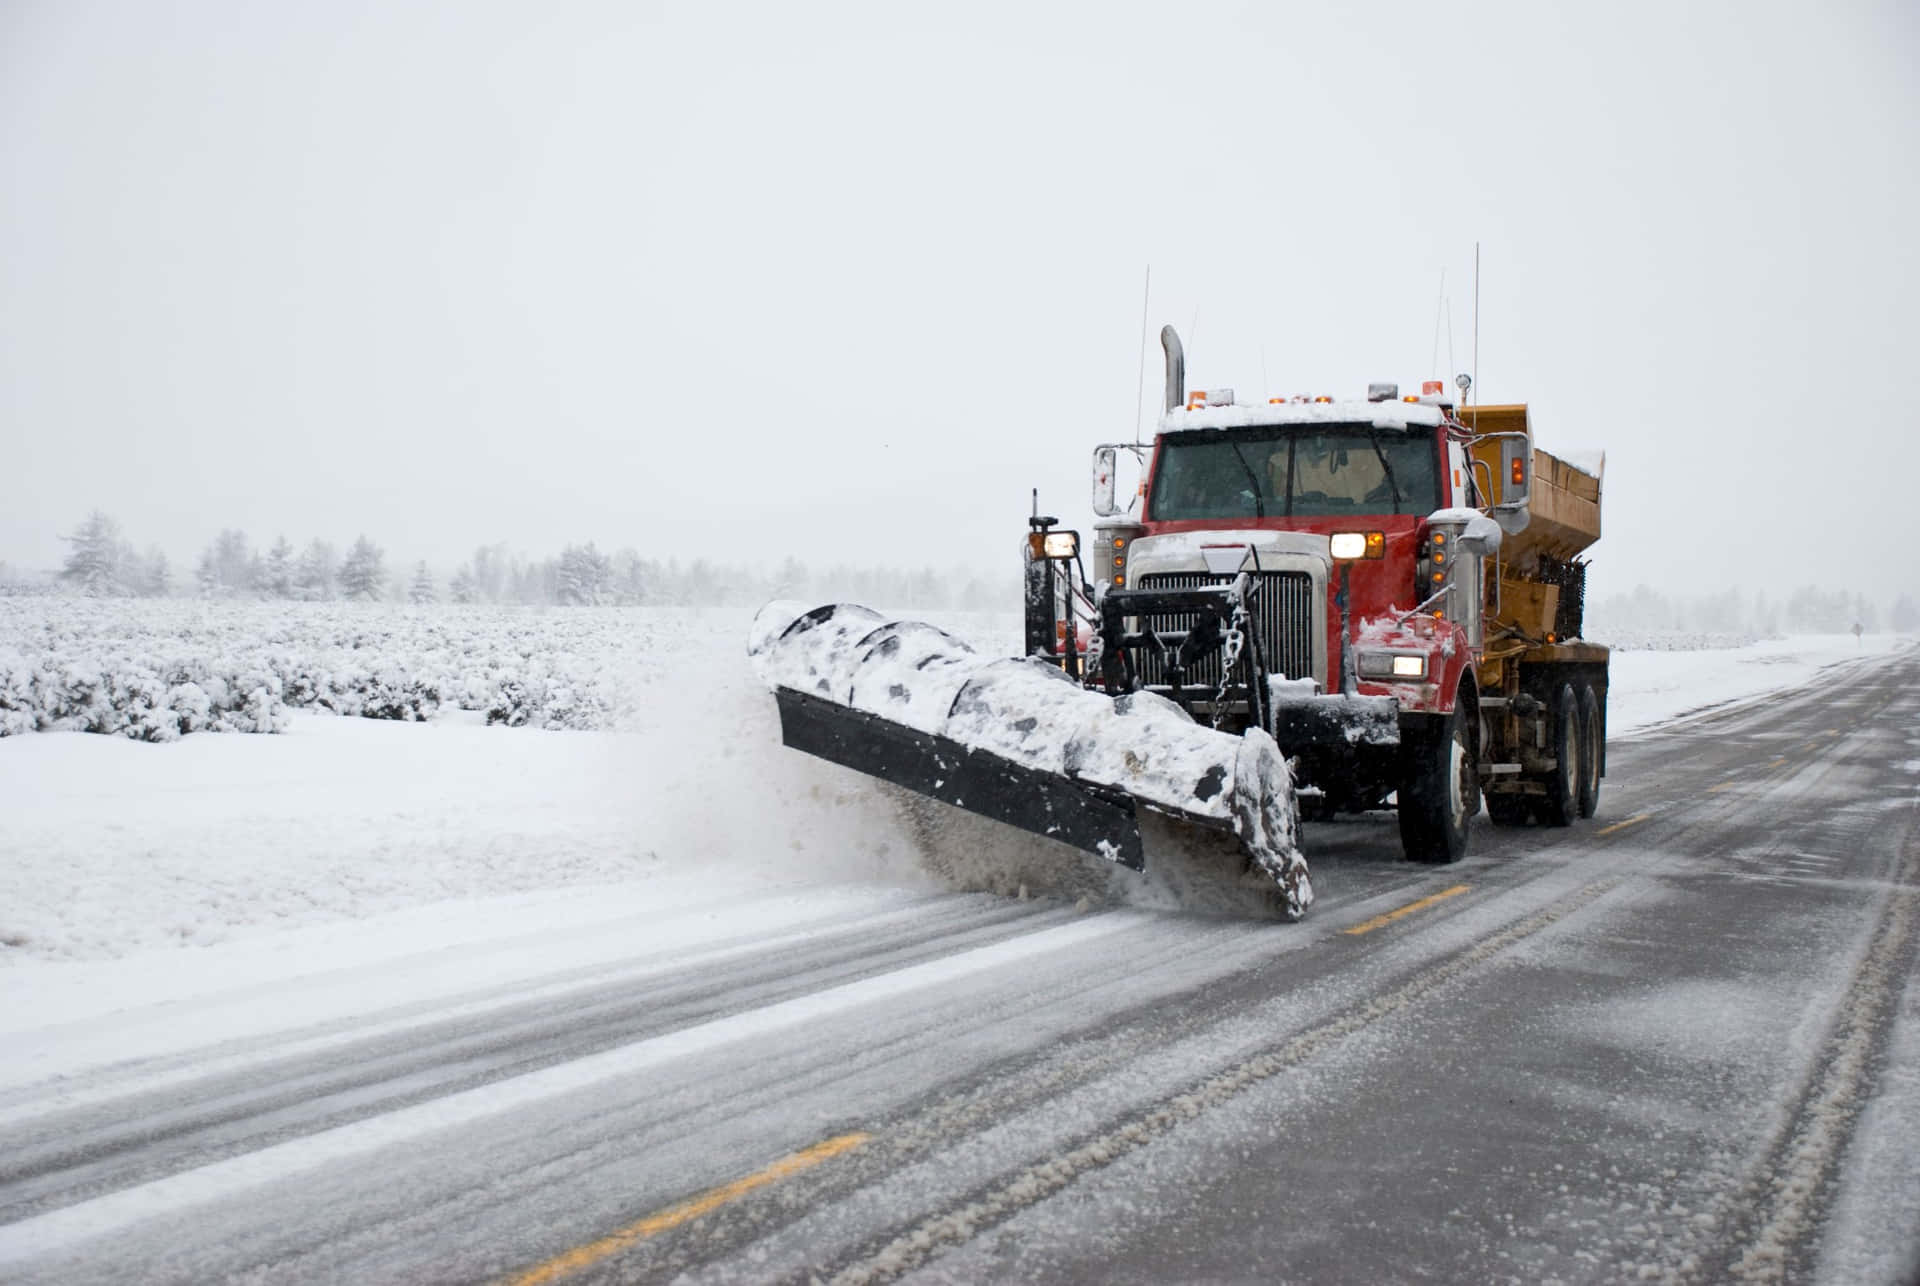 Snowplow clearing the snowy road Wallpaper